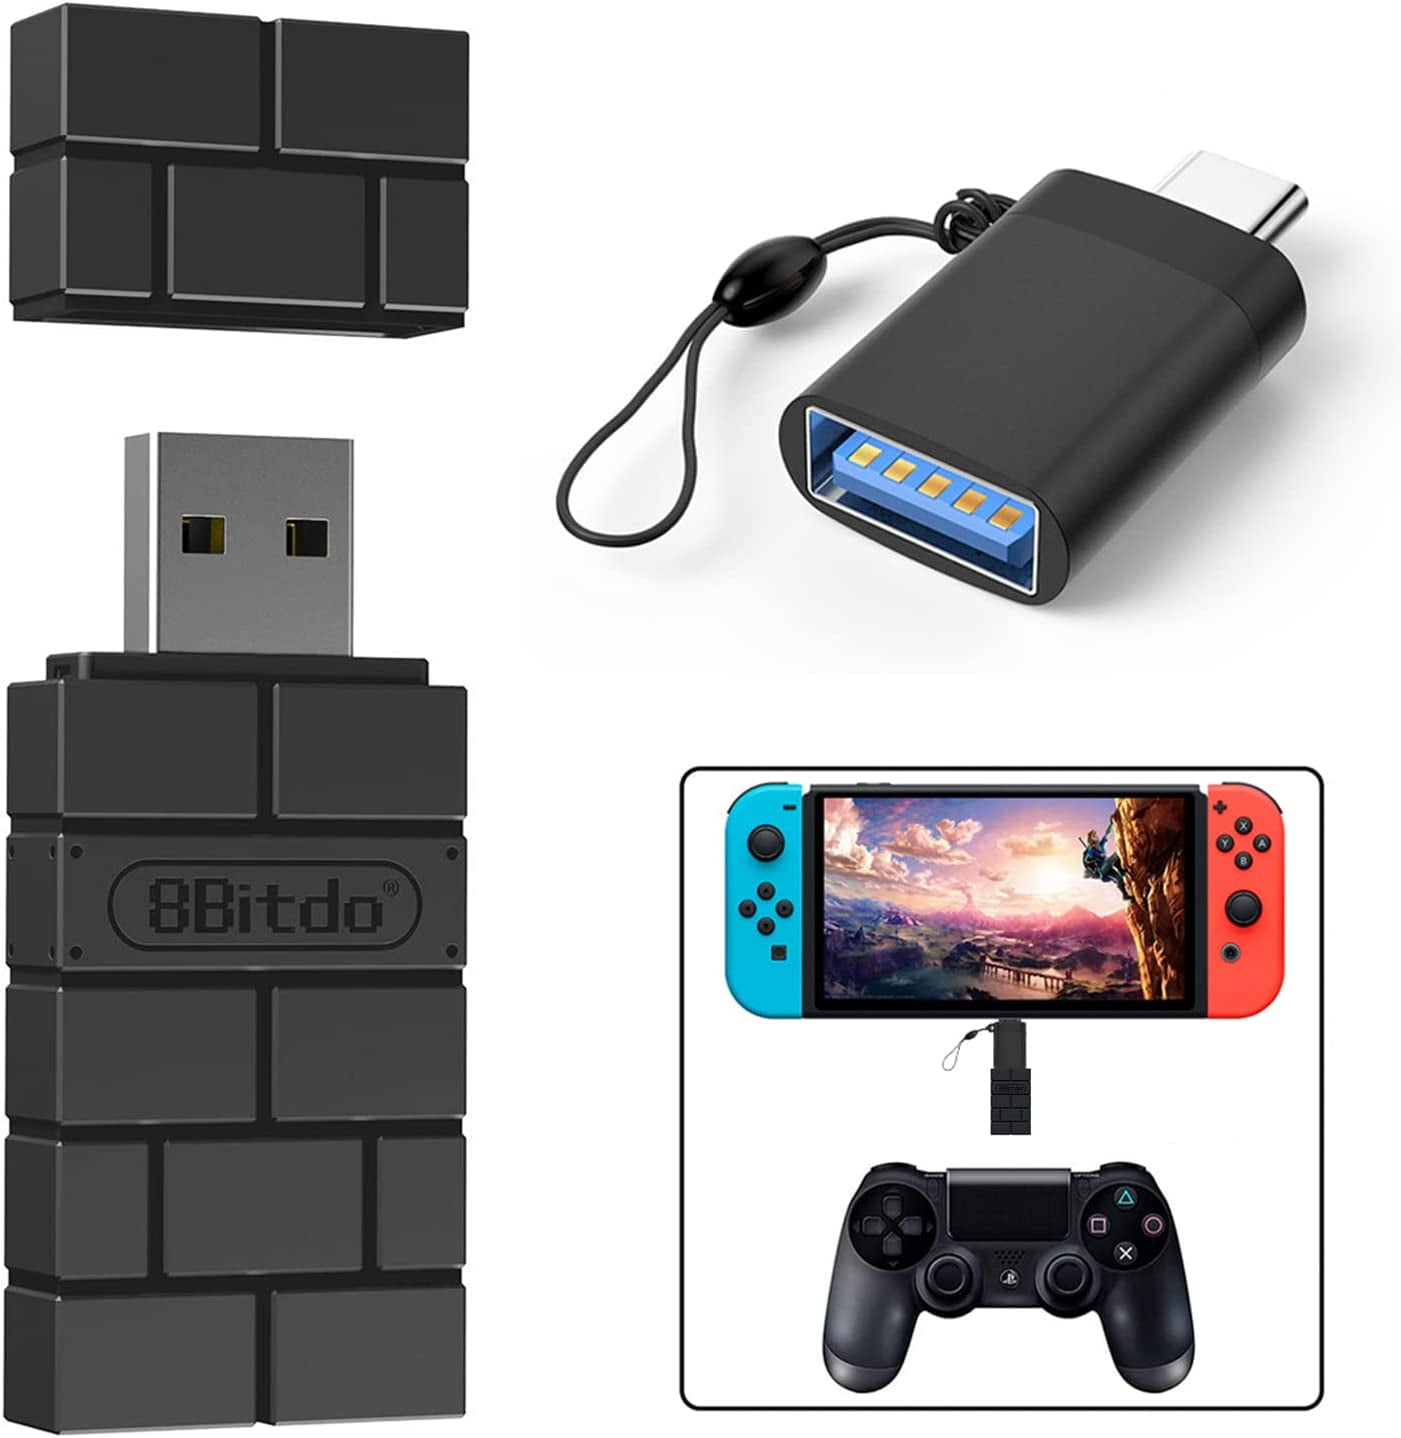 8Bitdo Wireless Controller USB Adapter 2 Gamepad Receiver Mini USB Switch  Converter Compatible with Switch/Switch OLED, Mac, Raspberry Pi, PS, PS5,  PC